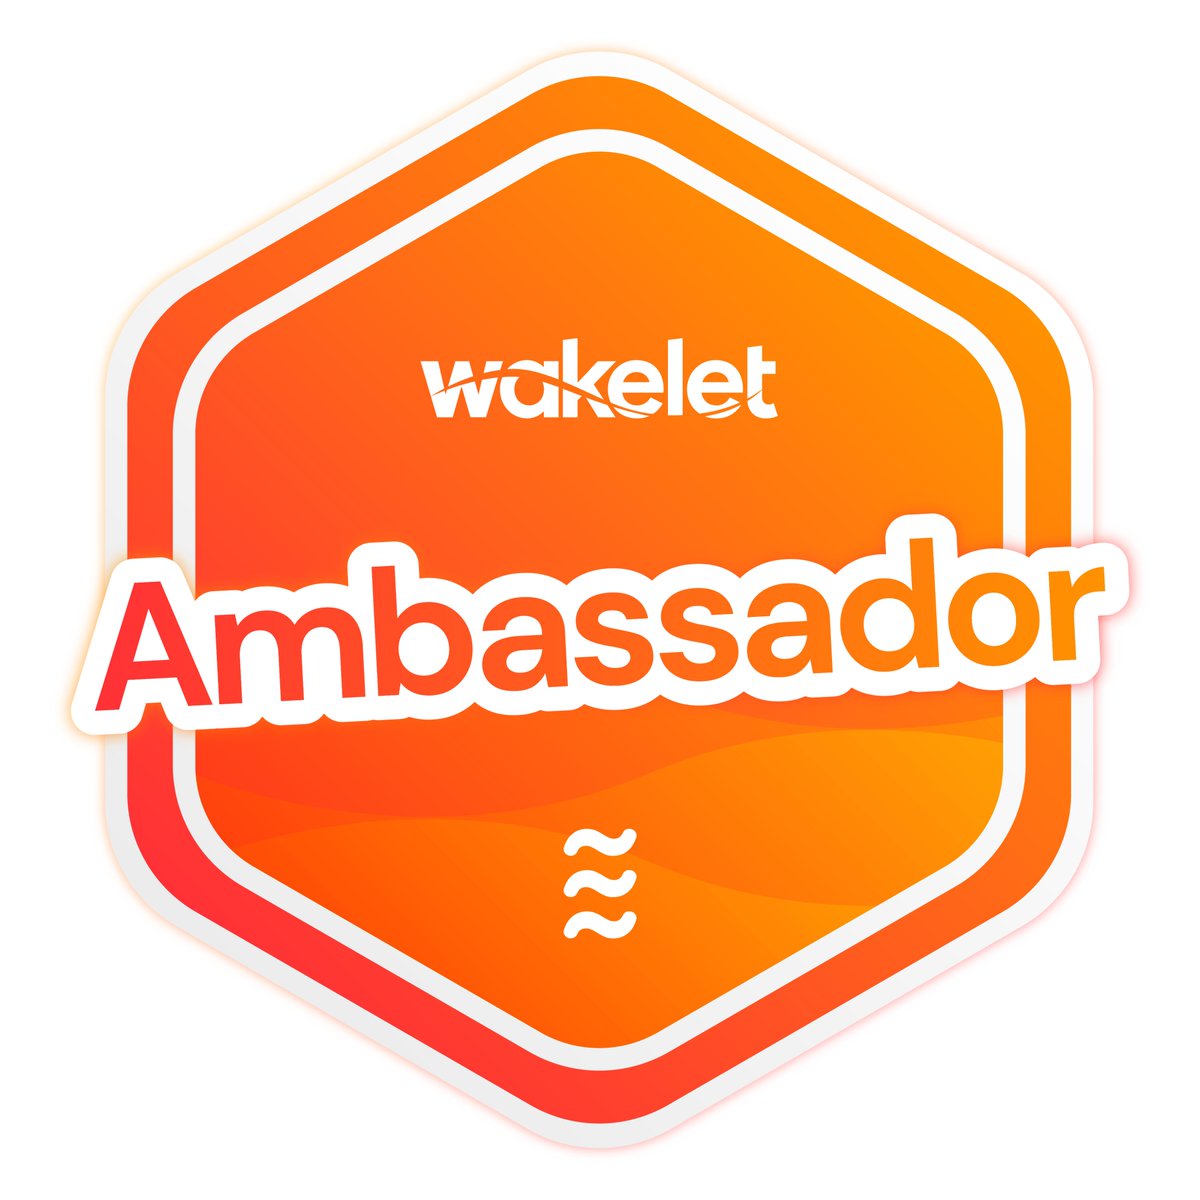 🌟 Exciting News! 🌟

Thrilled to share that I've been selected as a Wakelet Ambassador! 🚀 Can't wait to dive into this amazing community and explore all the incredible ways we can curate and share content. Let's embark on this journey together! 🌐💡 #WakeletAmbassador